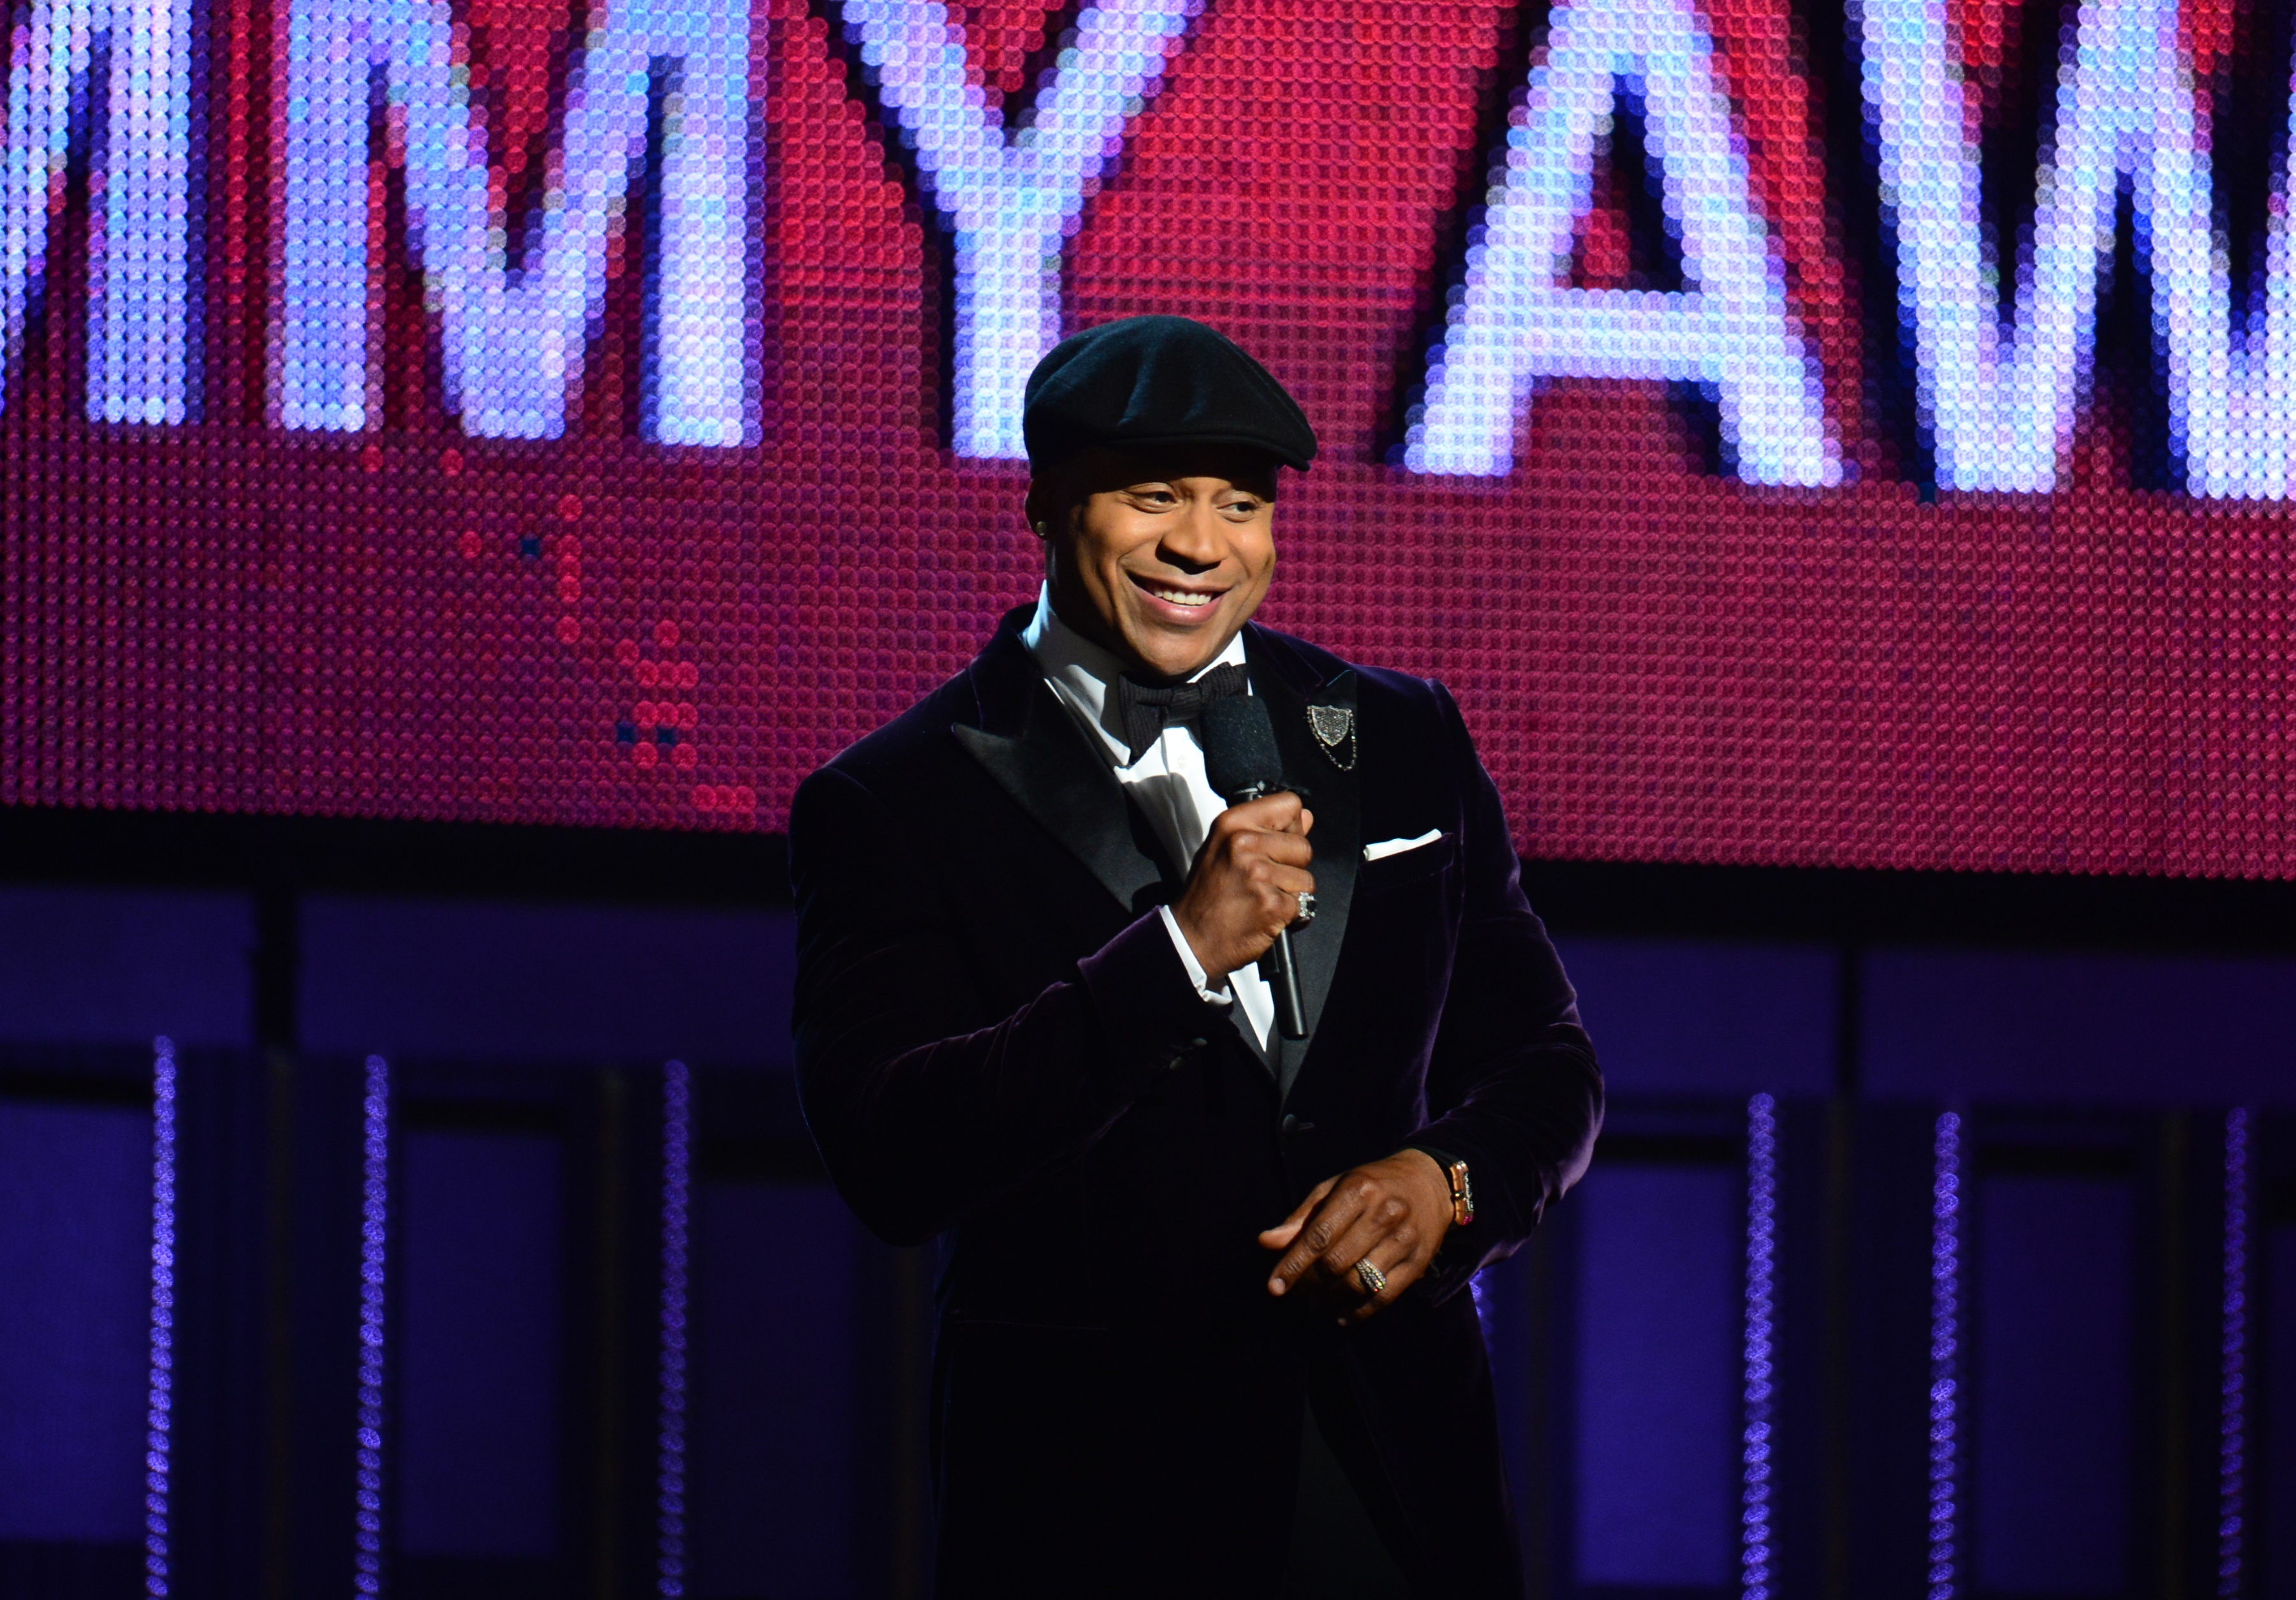 LL Cool J is Back to Host This Year’s Grammys